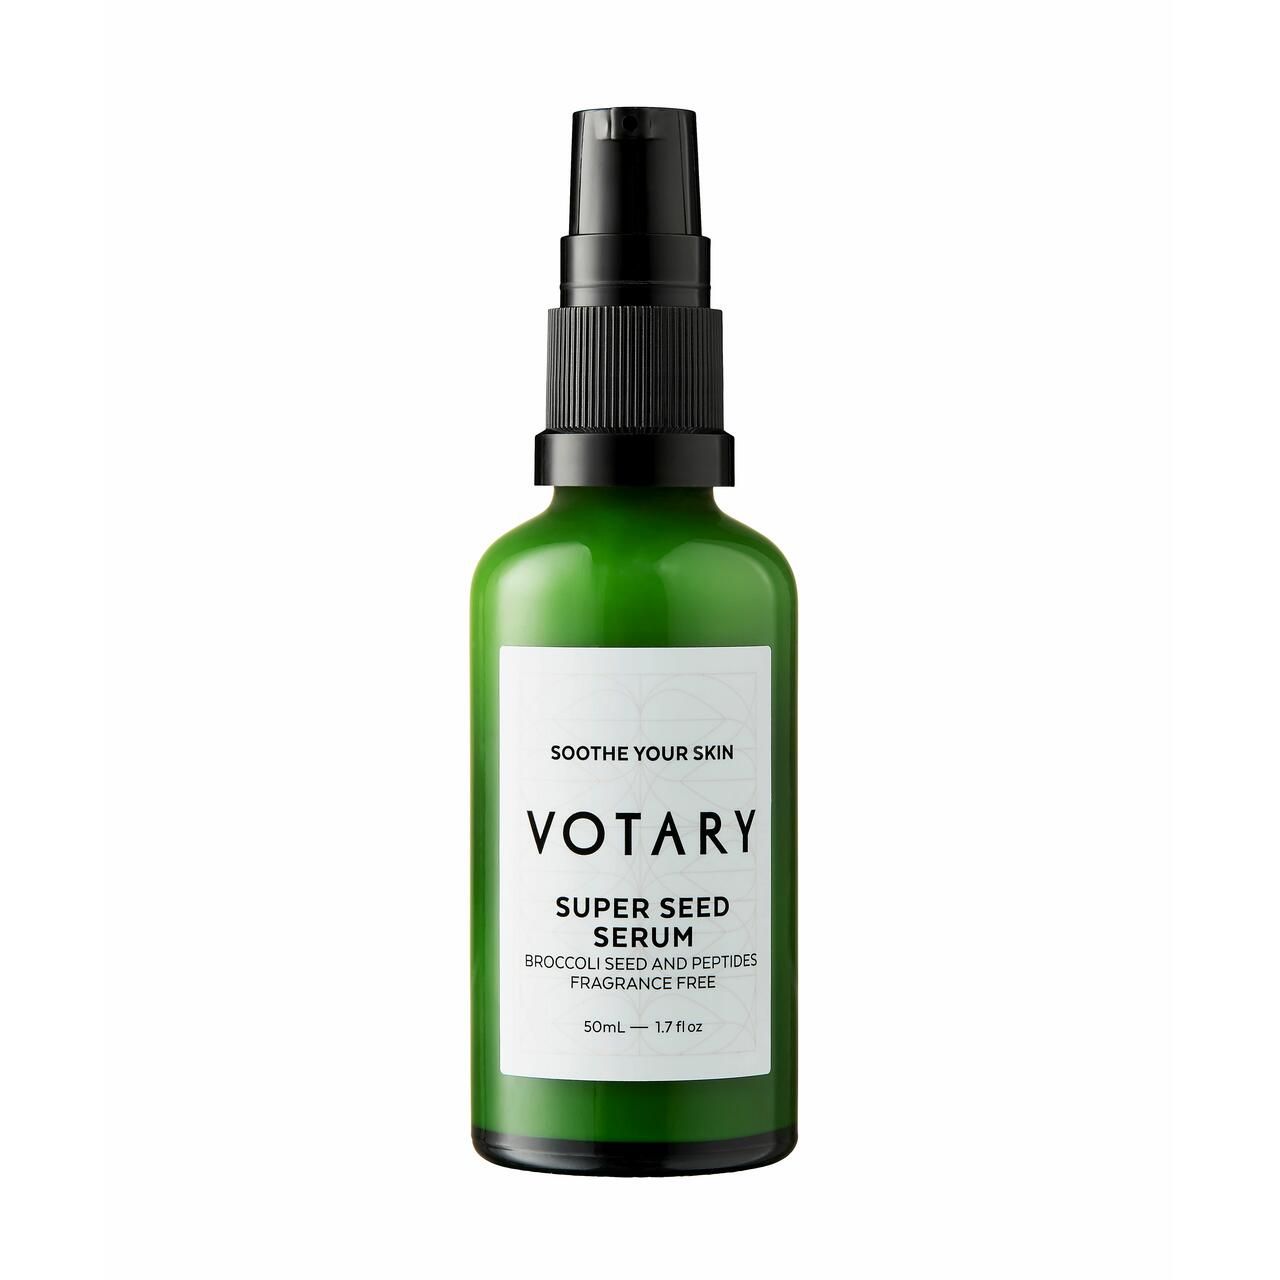 Votary, Super Seed Serum Broccoli Seed and Peptides Fragrance Free